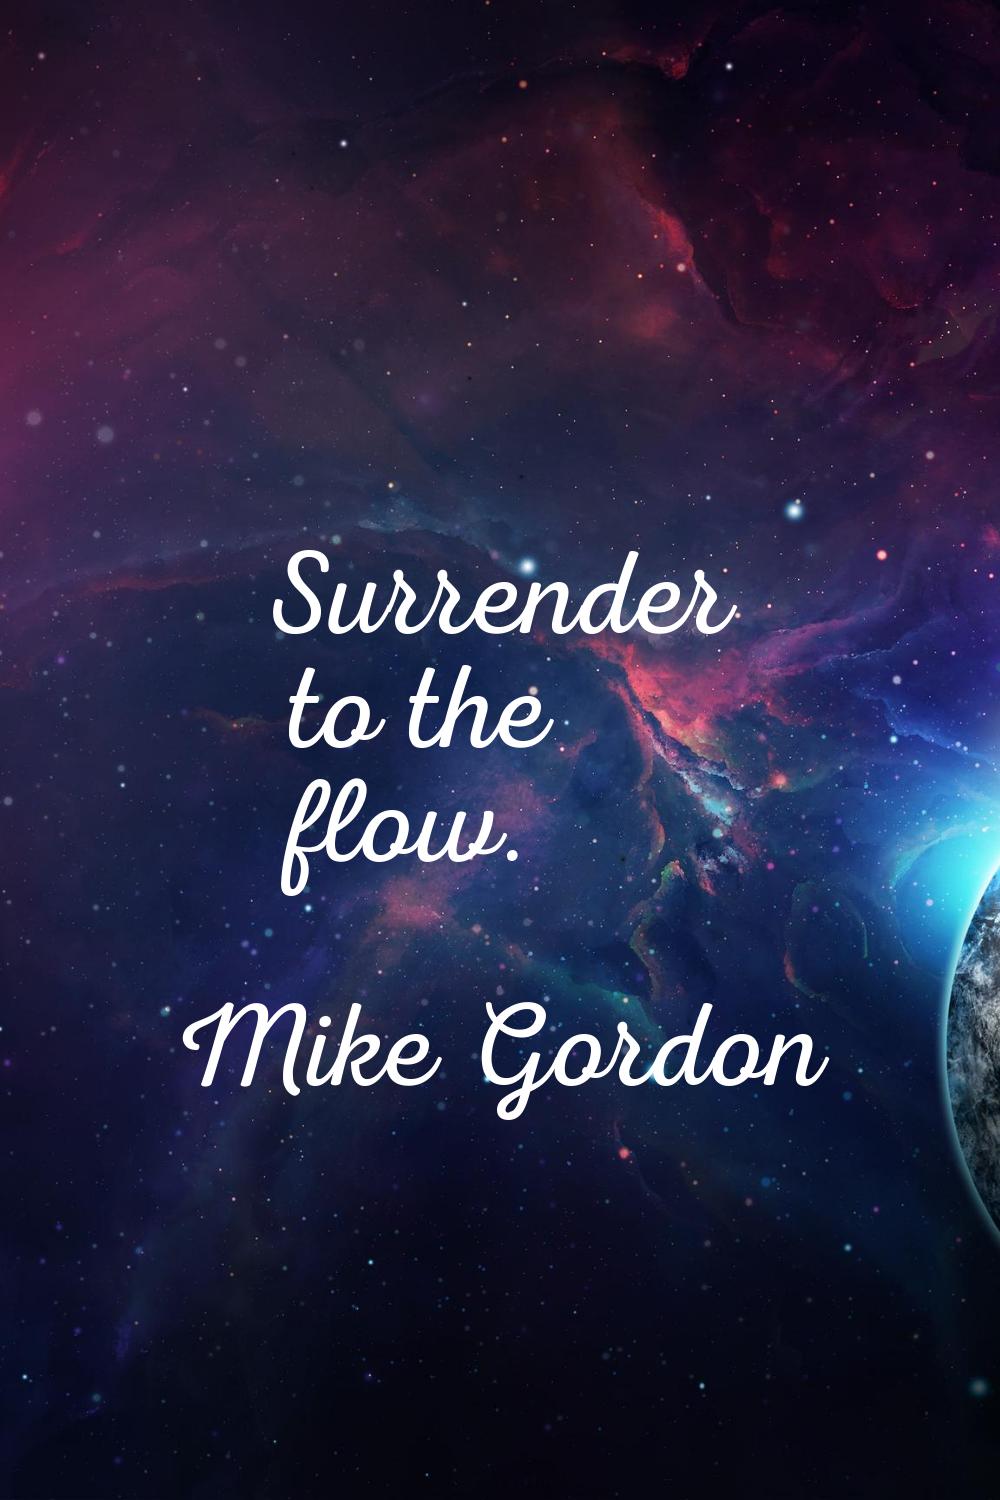 Surrender to the flow.